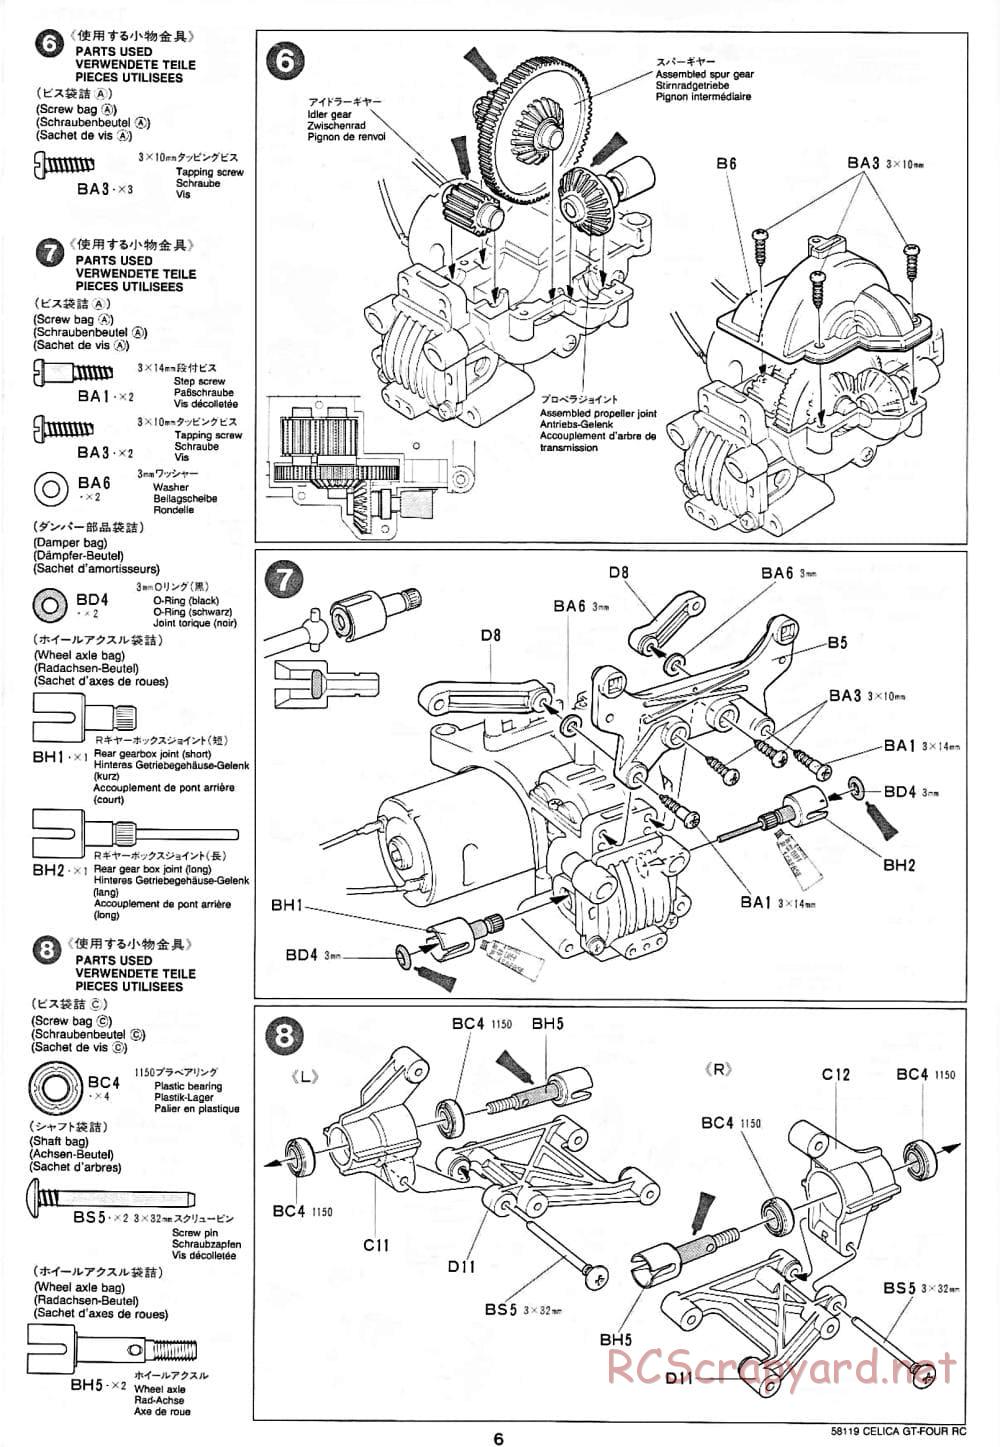 Tamiya - Toyota Celica GT-Four RC - TA-01 Chassis - Manual - Page 6